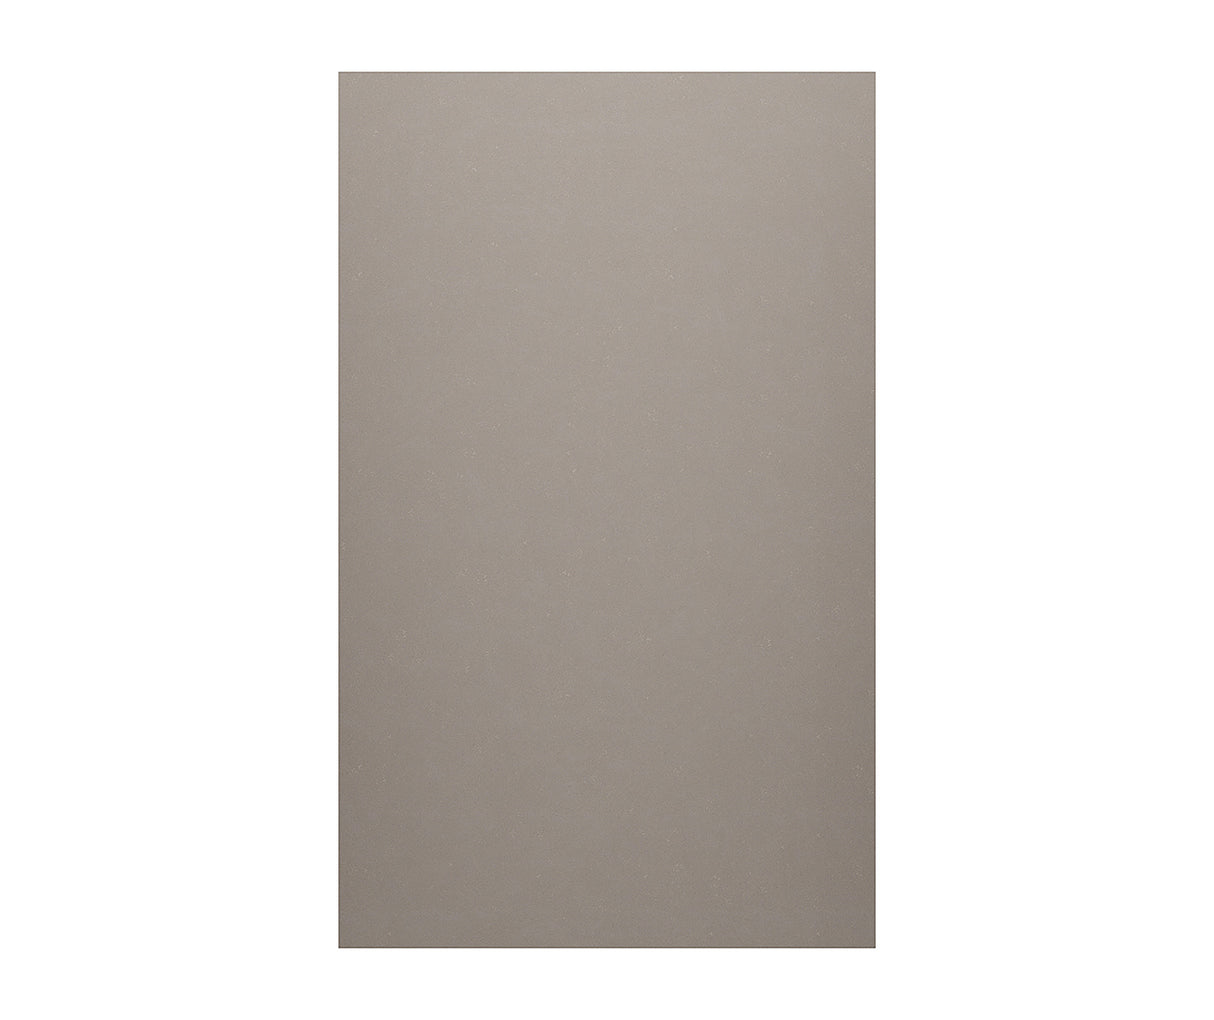 Swanstone SS-6060-1 60 x 60 Swanstone Smooth Glue up Bath Single Wall Panel in Clay SS0606001.212